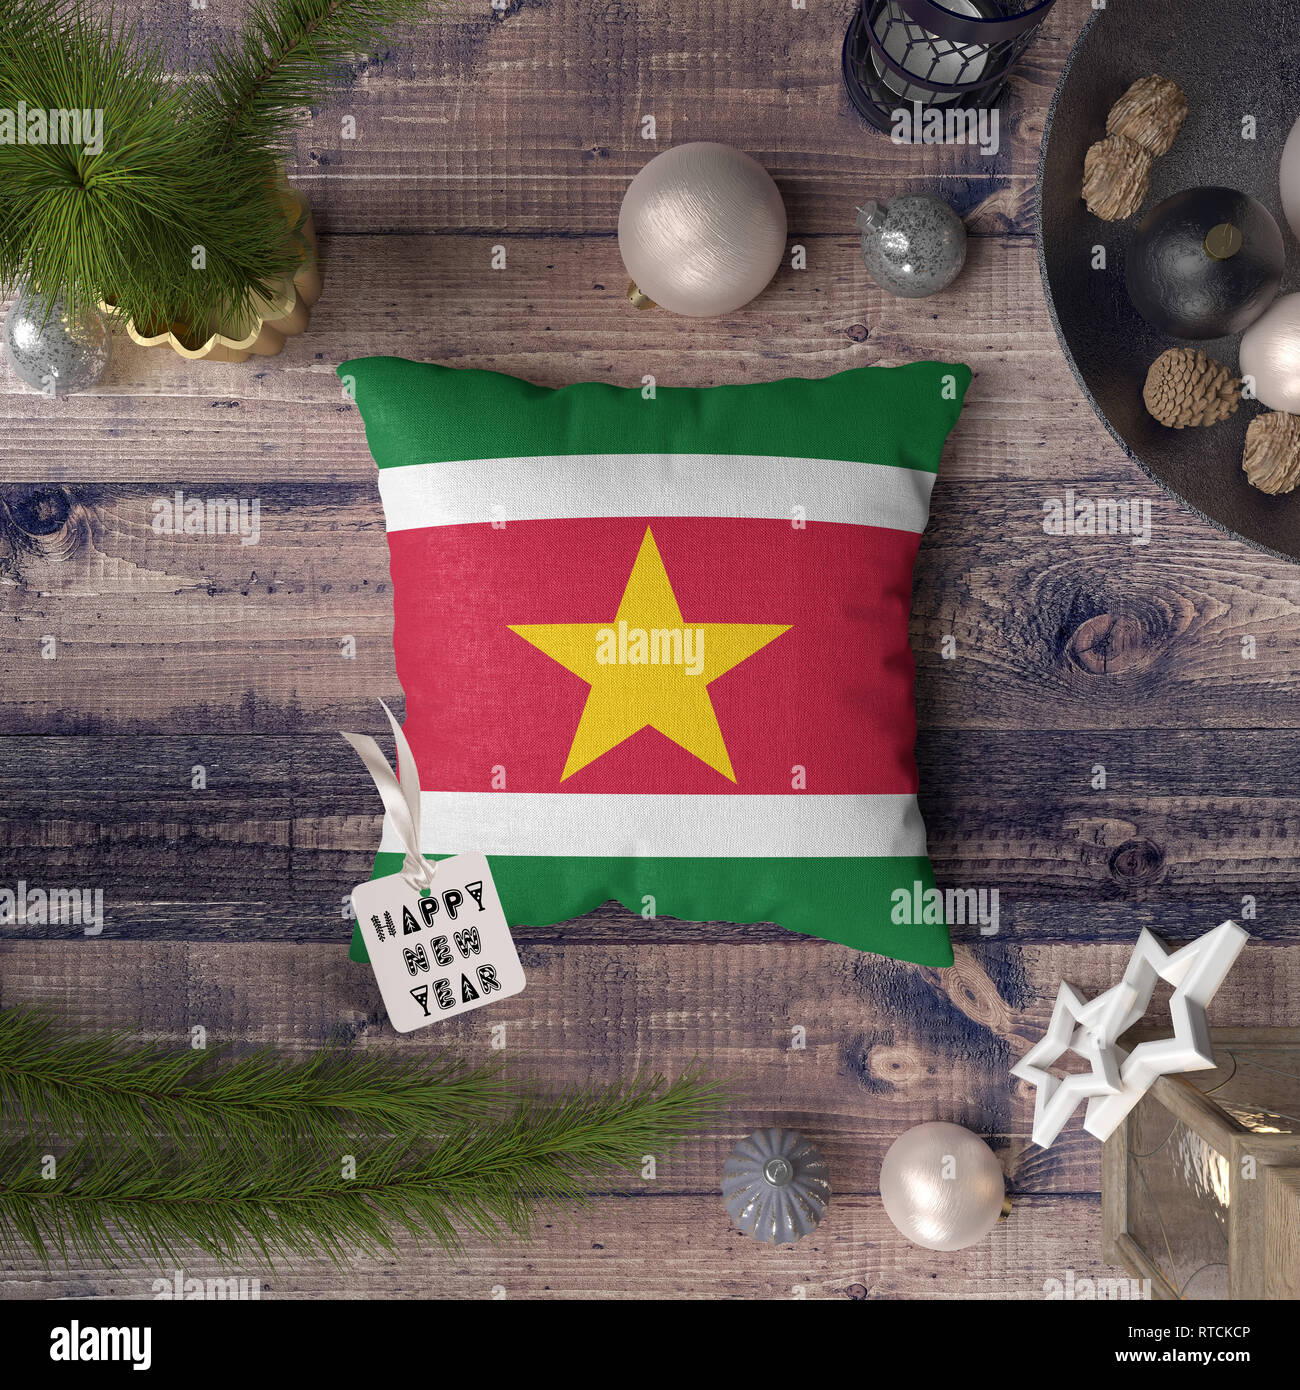 Happy New Year tag with Suriname flag on pillow. Christmas decoration concept on wooden table with lovely objects. Stock Photo